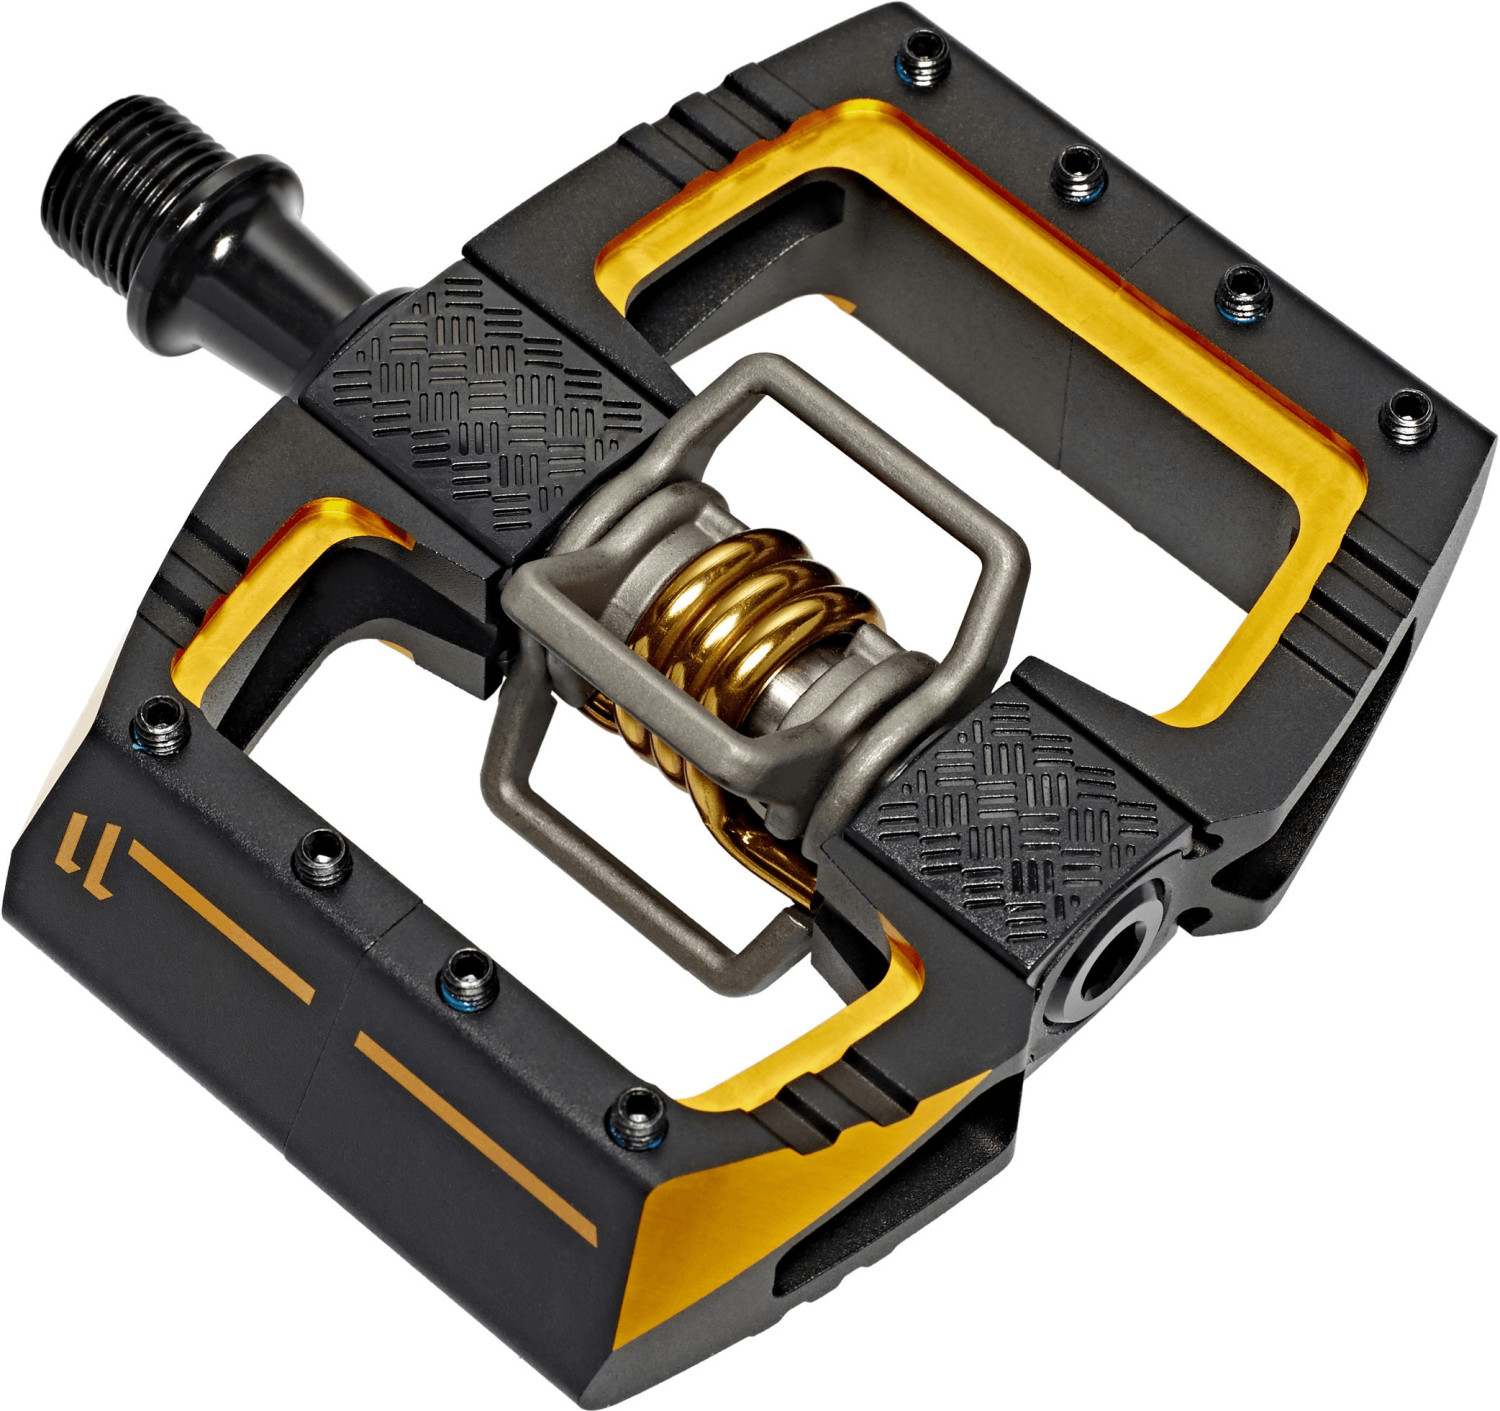 CRANK BROTHERS クランクブラザーズ MALLET DH 11 PEDALS BLACK/GOLD